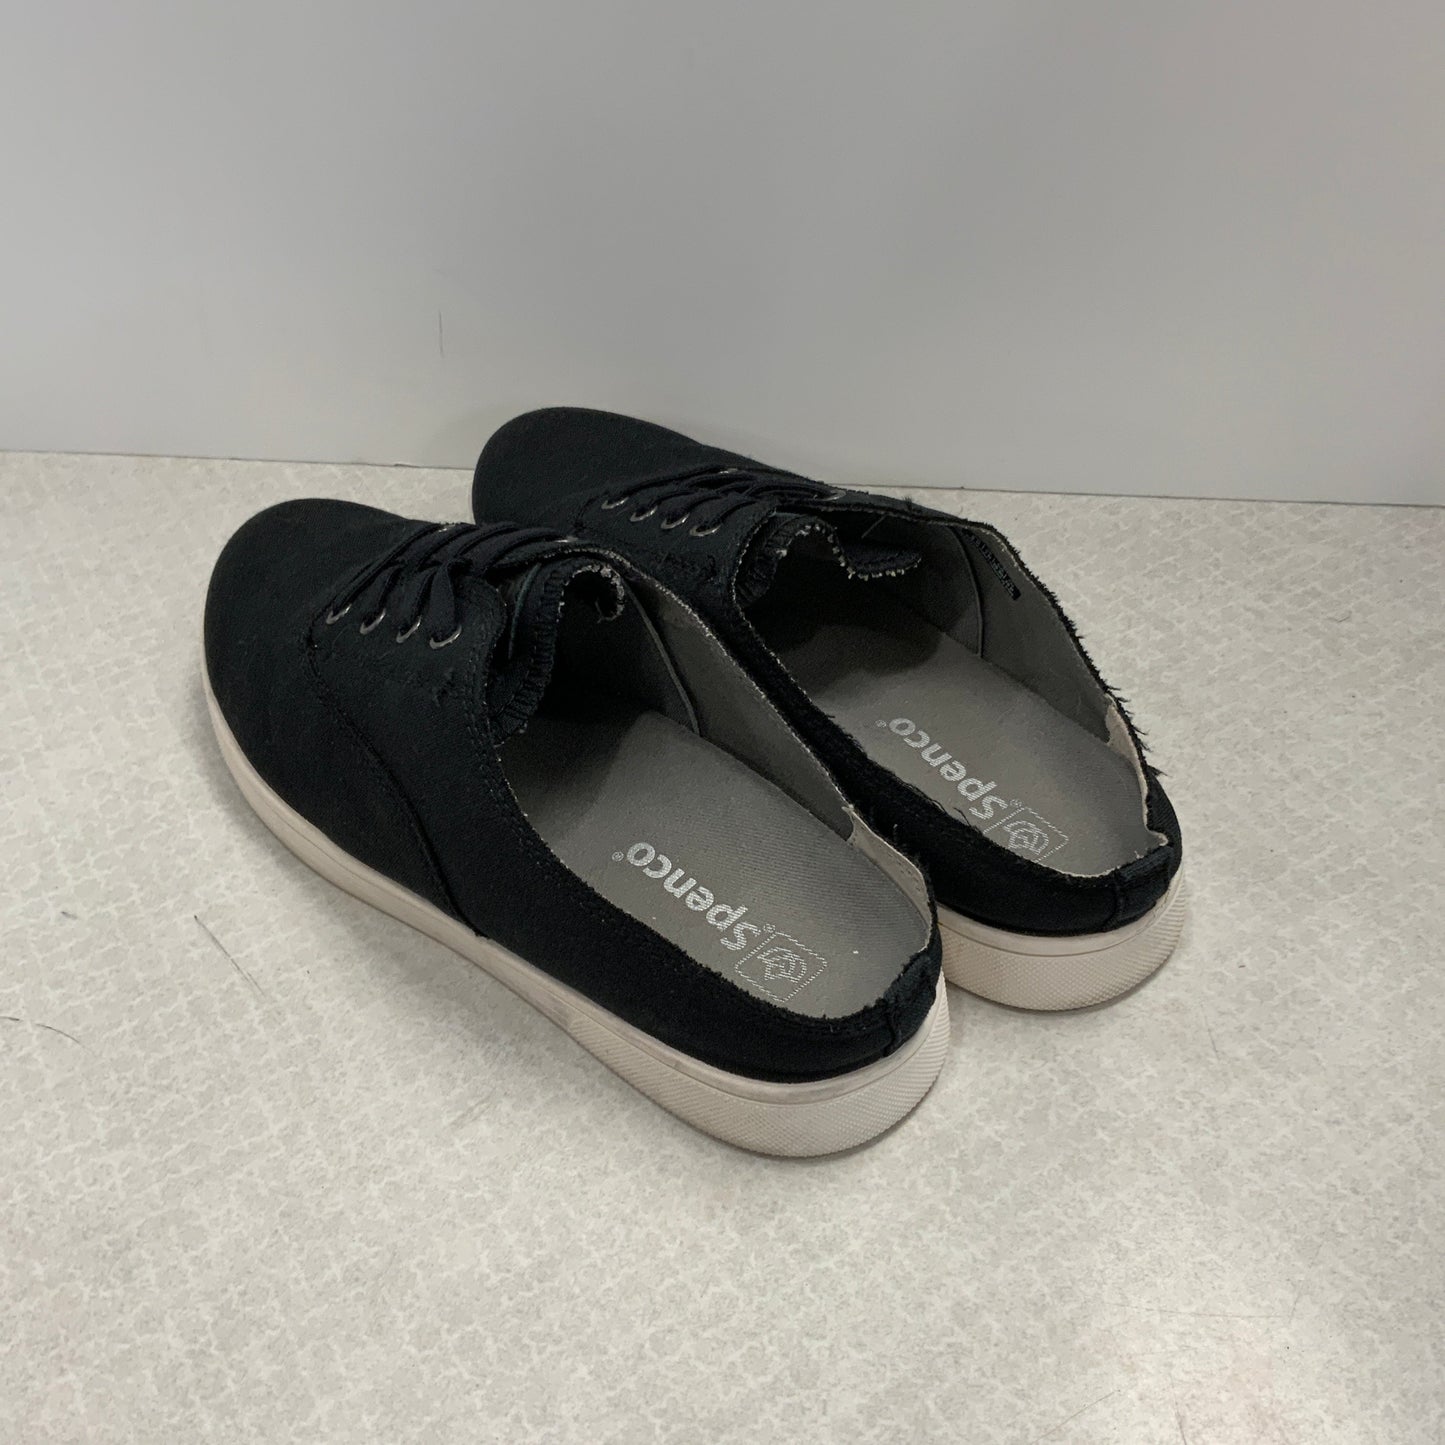 Black Shoes Sneakers Spenco, Size 9